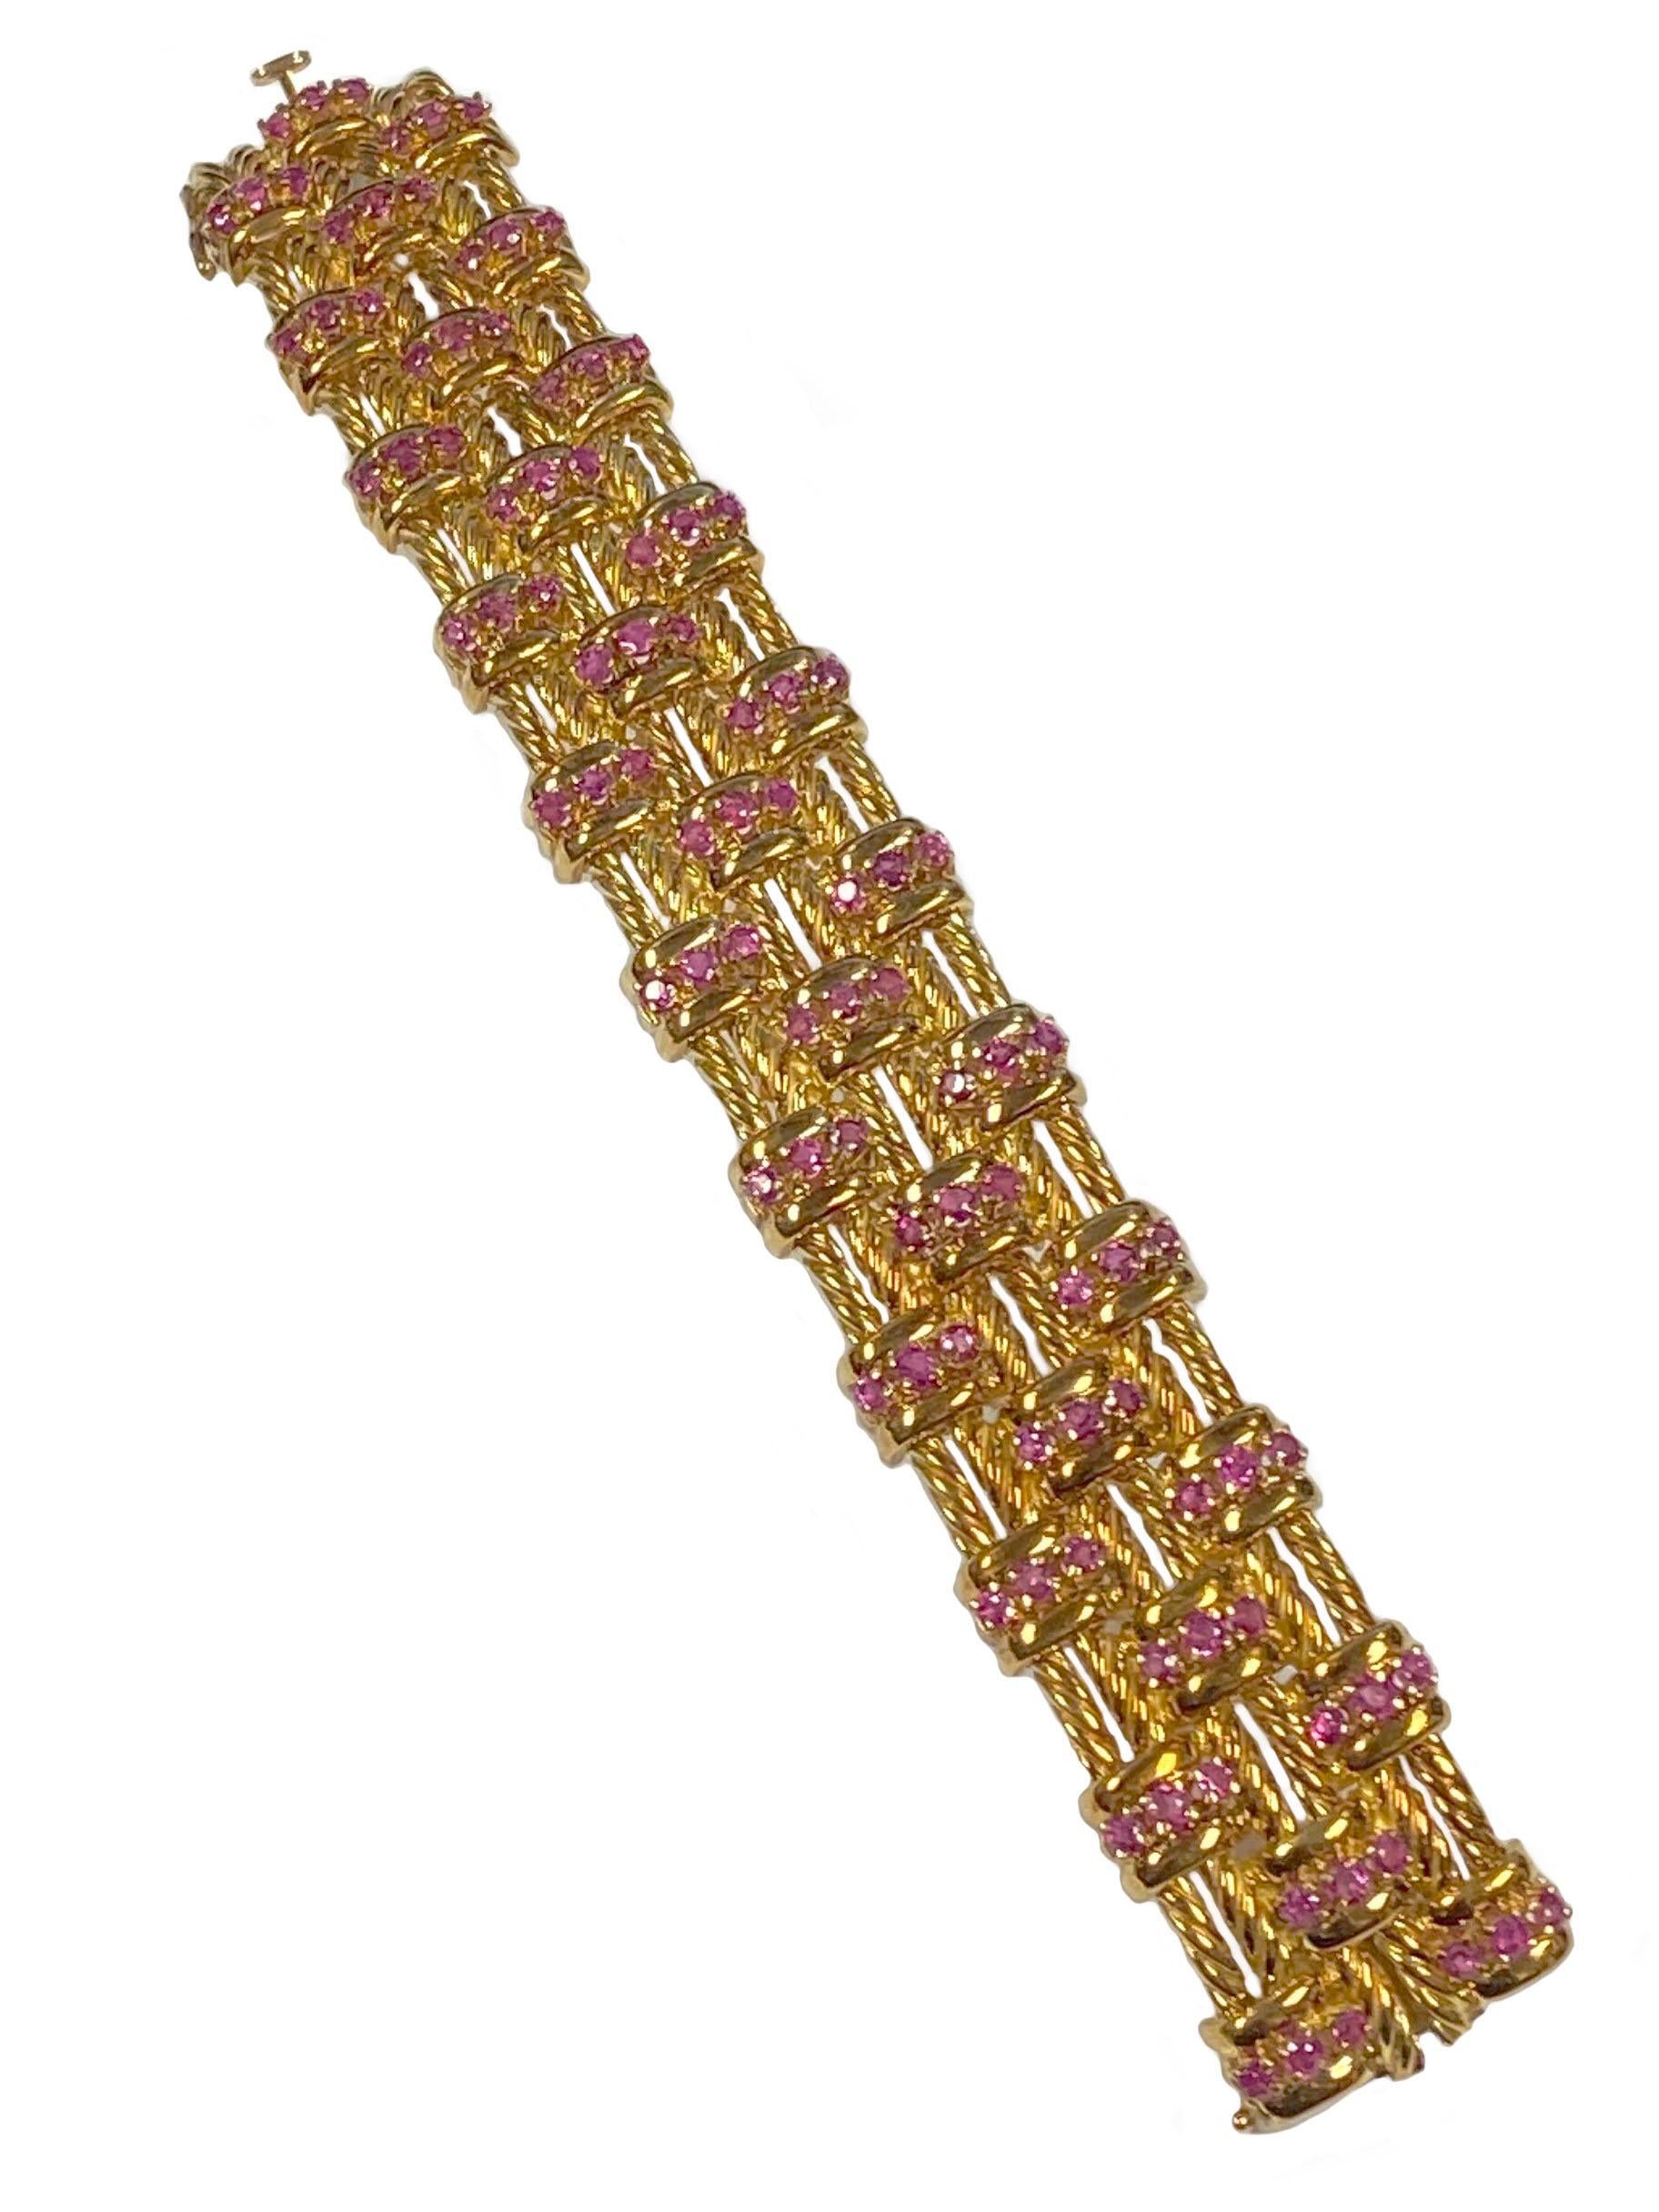 Circa 1960s Tiffany & Company 18k Yellow Gold Bracelet in a twisted Rope links design, measuring just under 1 inch wide, 6 7/8 inches in length and weighing 106 Grams. Set with round Rubies totaling 2.50 Carats.  